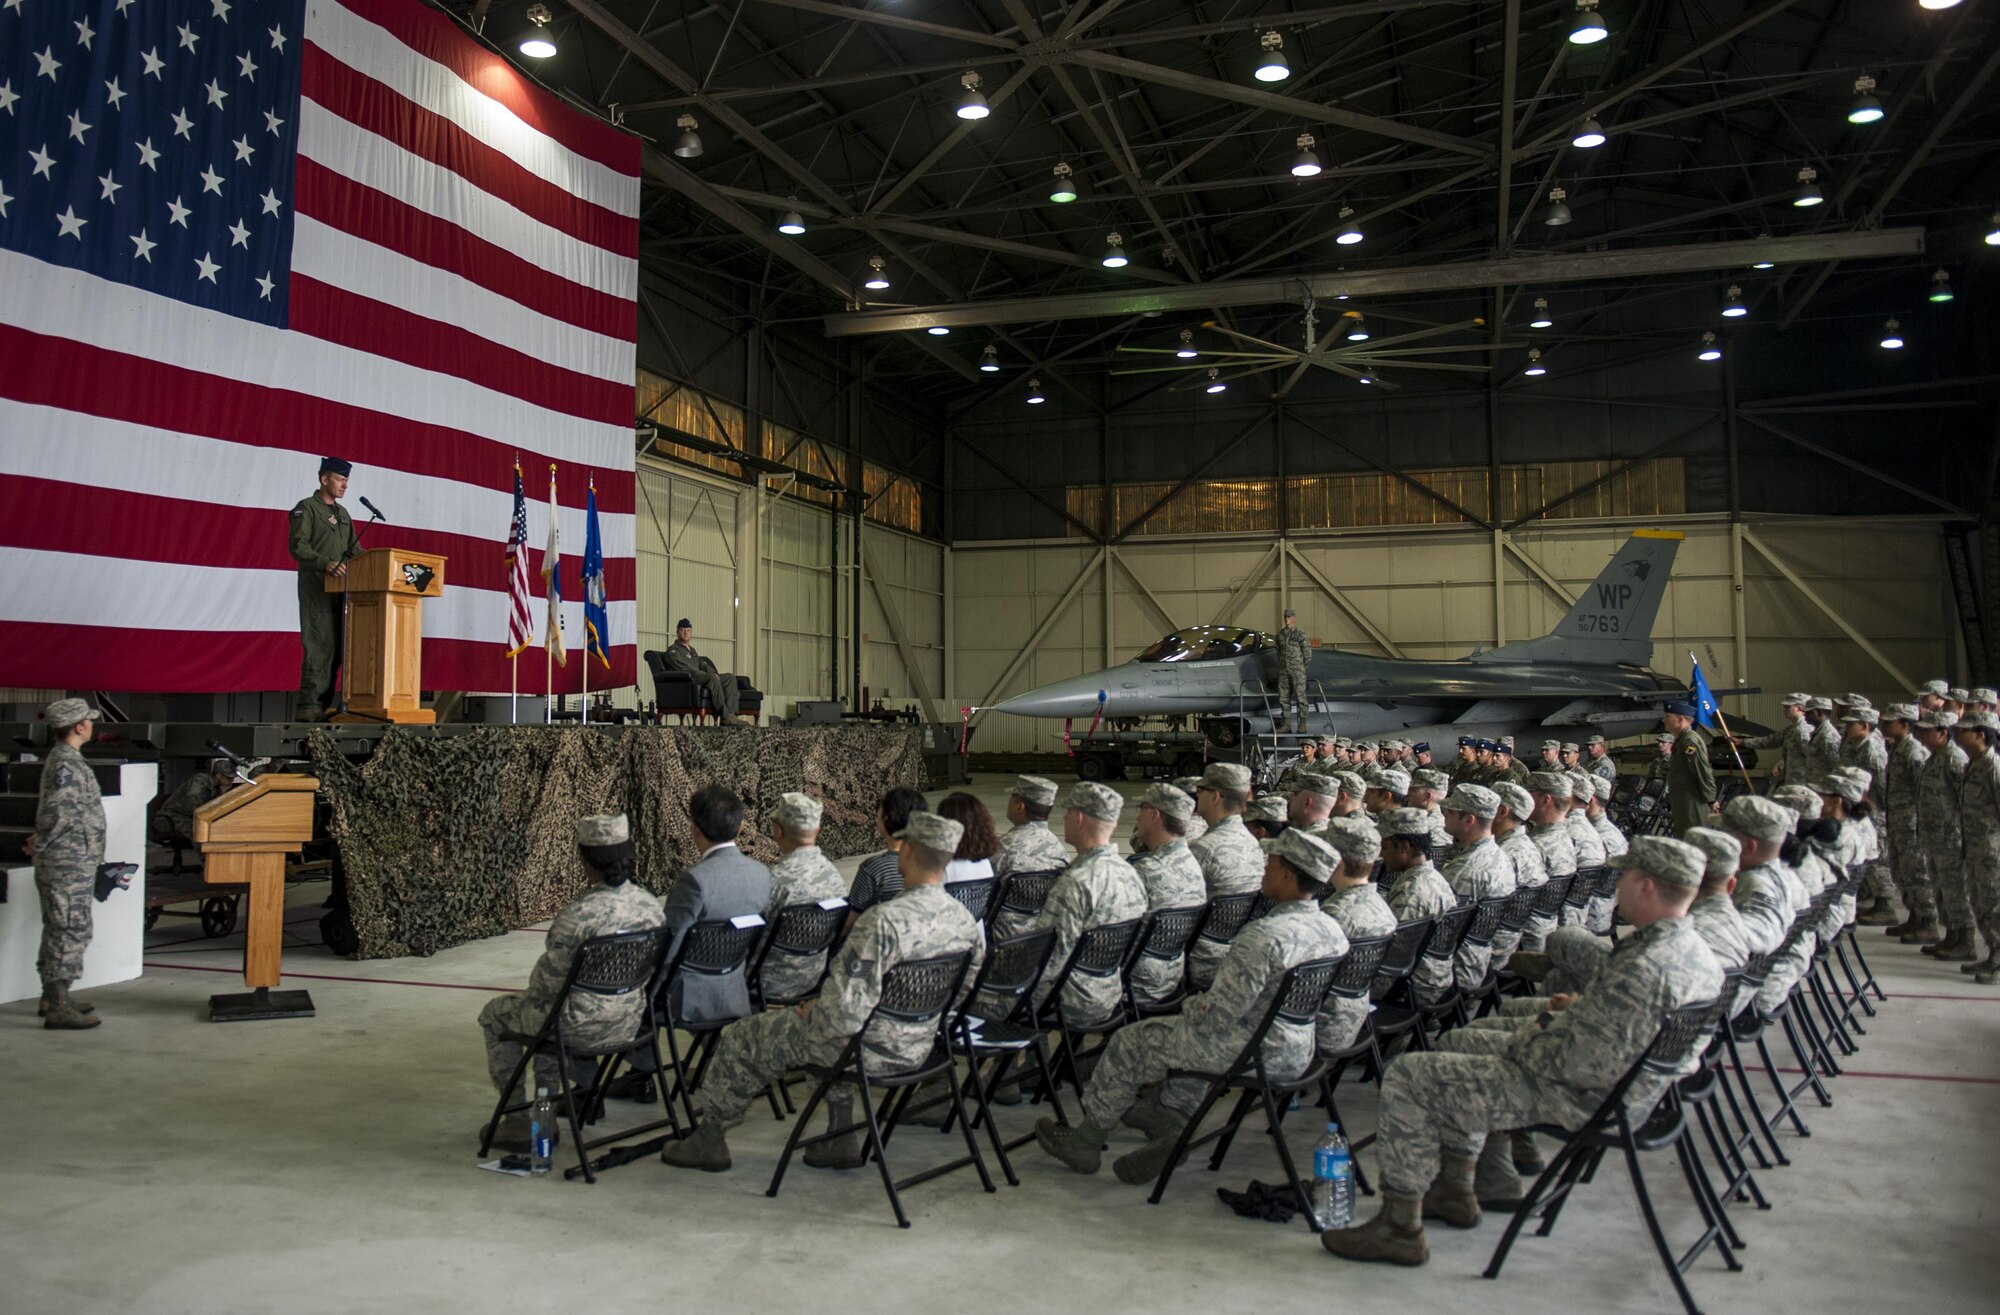 U.S. Air Force Col. Kristopher Struve, 8th Operations Group commander, speaks to the 8th Fighter Wing during an assumption of command ceremony at Kunsan Air Base, Republic of Korea, July 31, 2017. Struve took command of the 8th OG and, upon assuming the position, received the title of “Viper.” (U.S. Air Force photo by Senior Airman Colville McFee/Released)